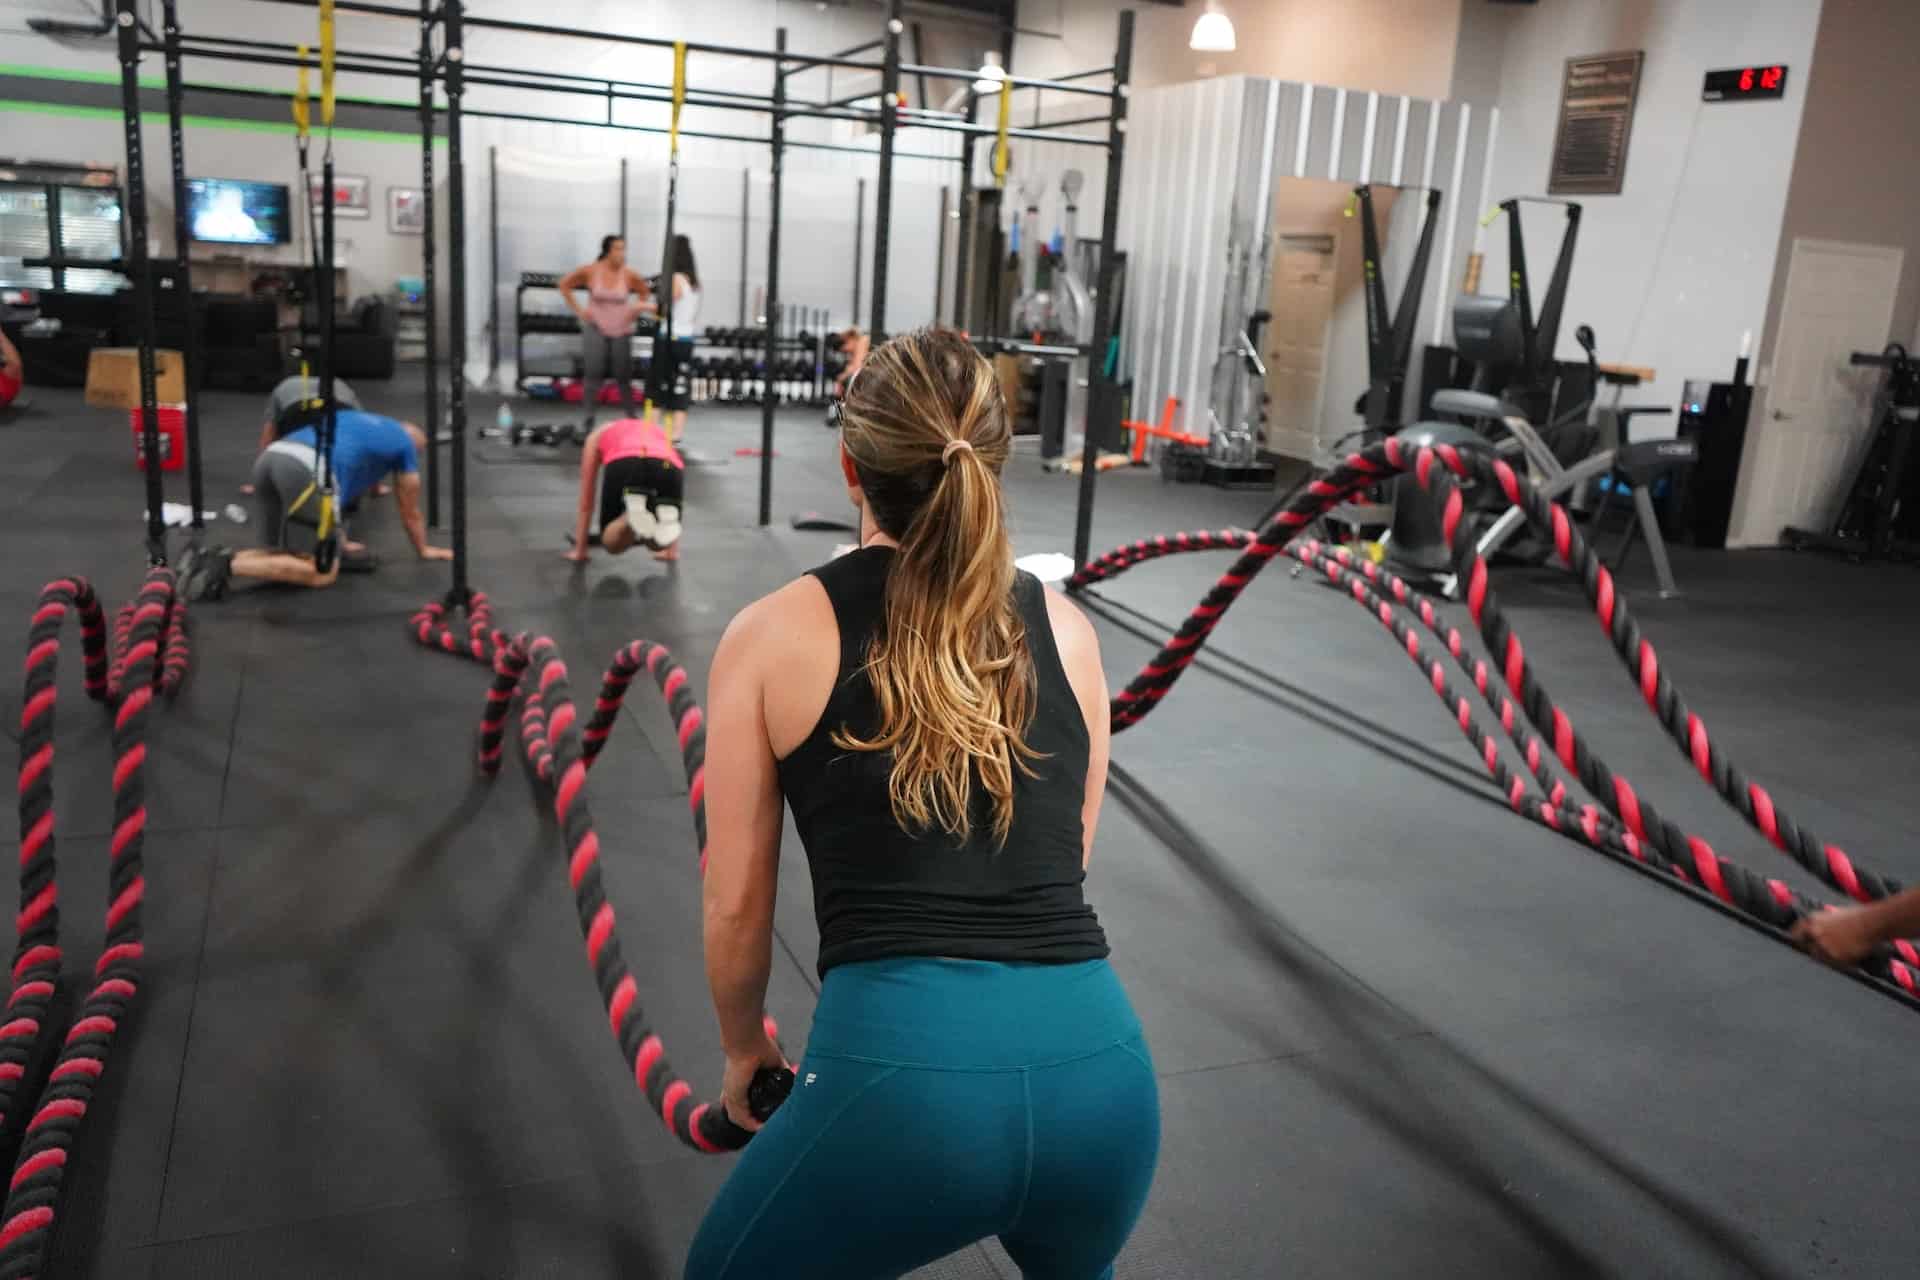 Crossfit. Find out if it’s the sport for you